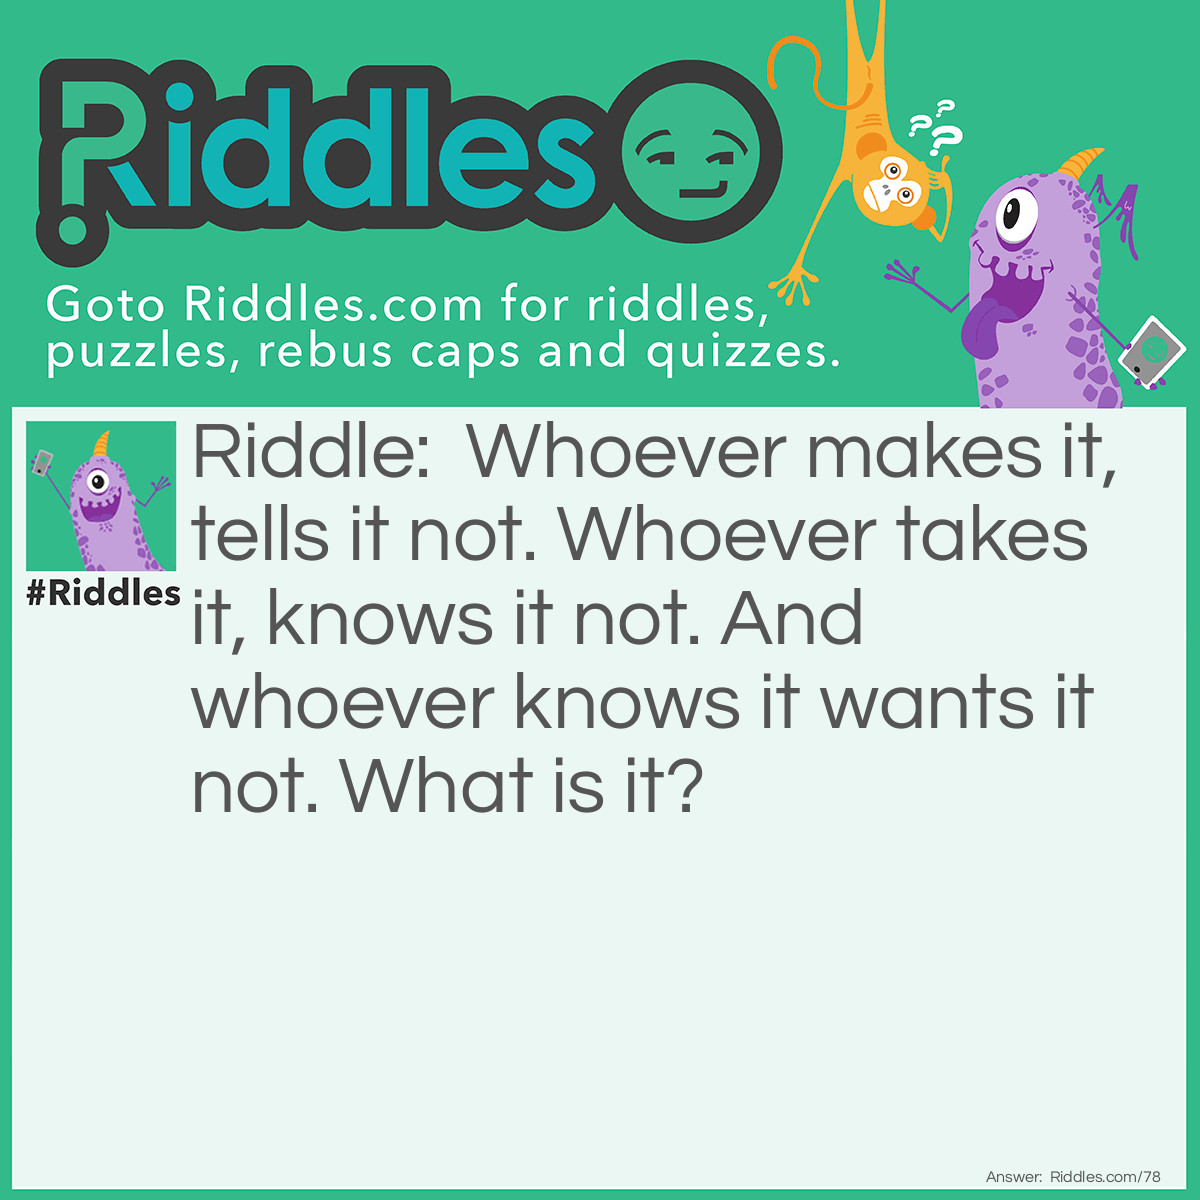 Riddle: Whoever makes it, tells it not. Whoever takes it, knows it not. And whoever knows it wants it not. What is it? Answer: Counterfeit money.